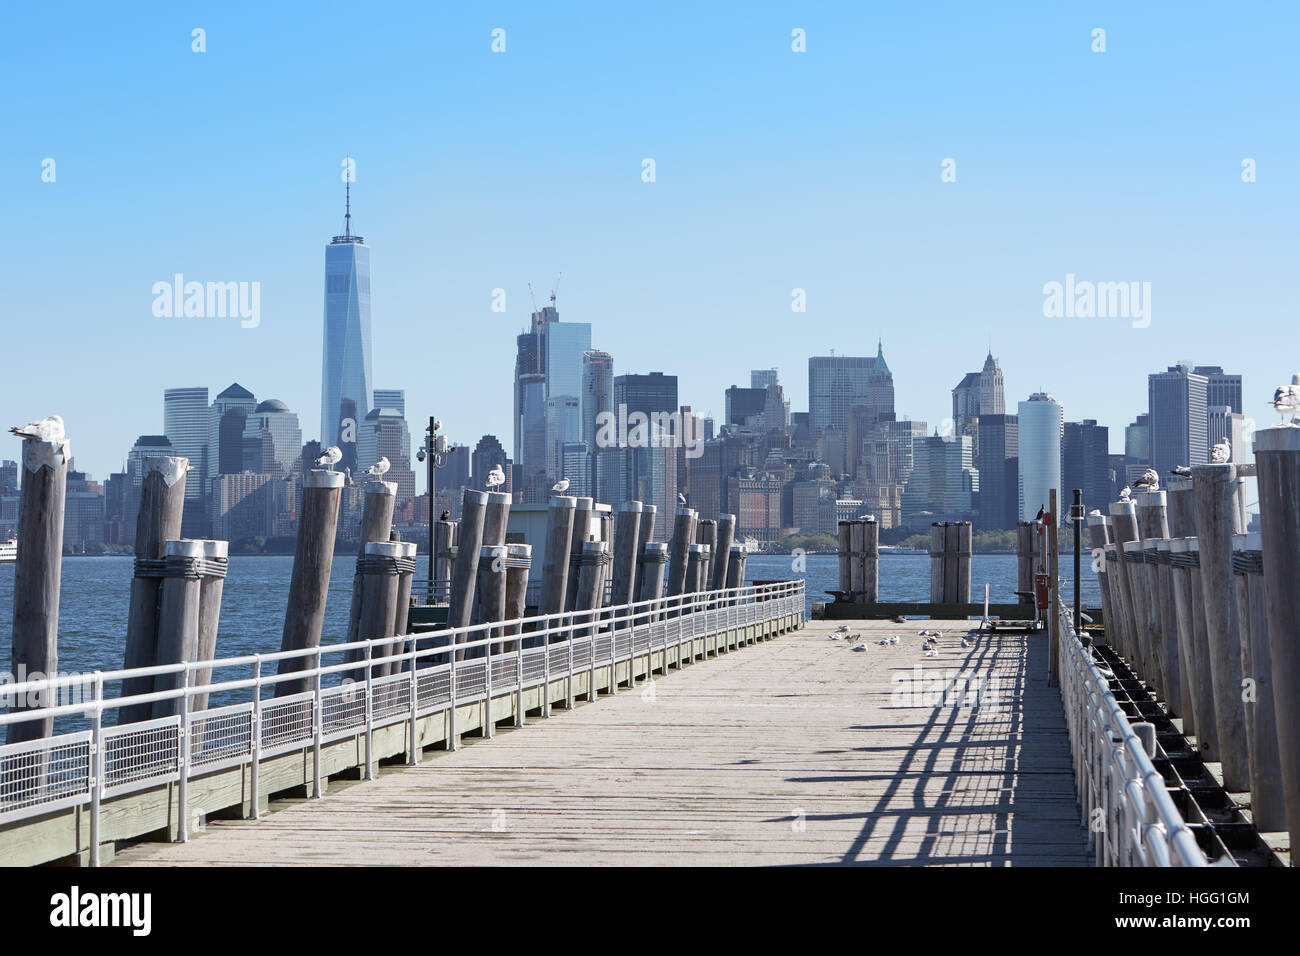 New York city skyscrapers and empty pier with seagulls, sunlight Stock Photo